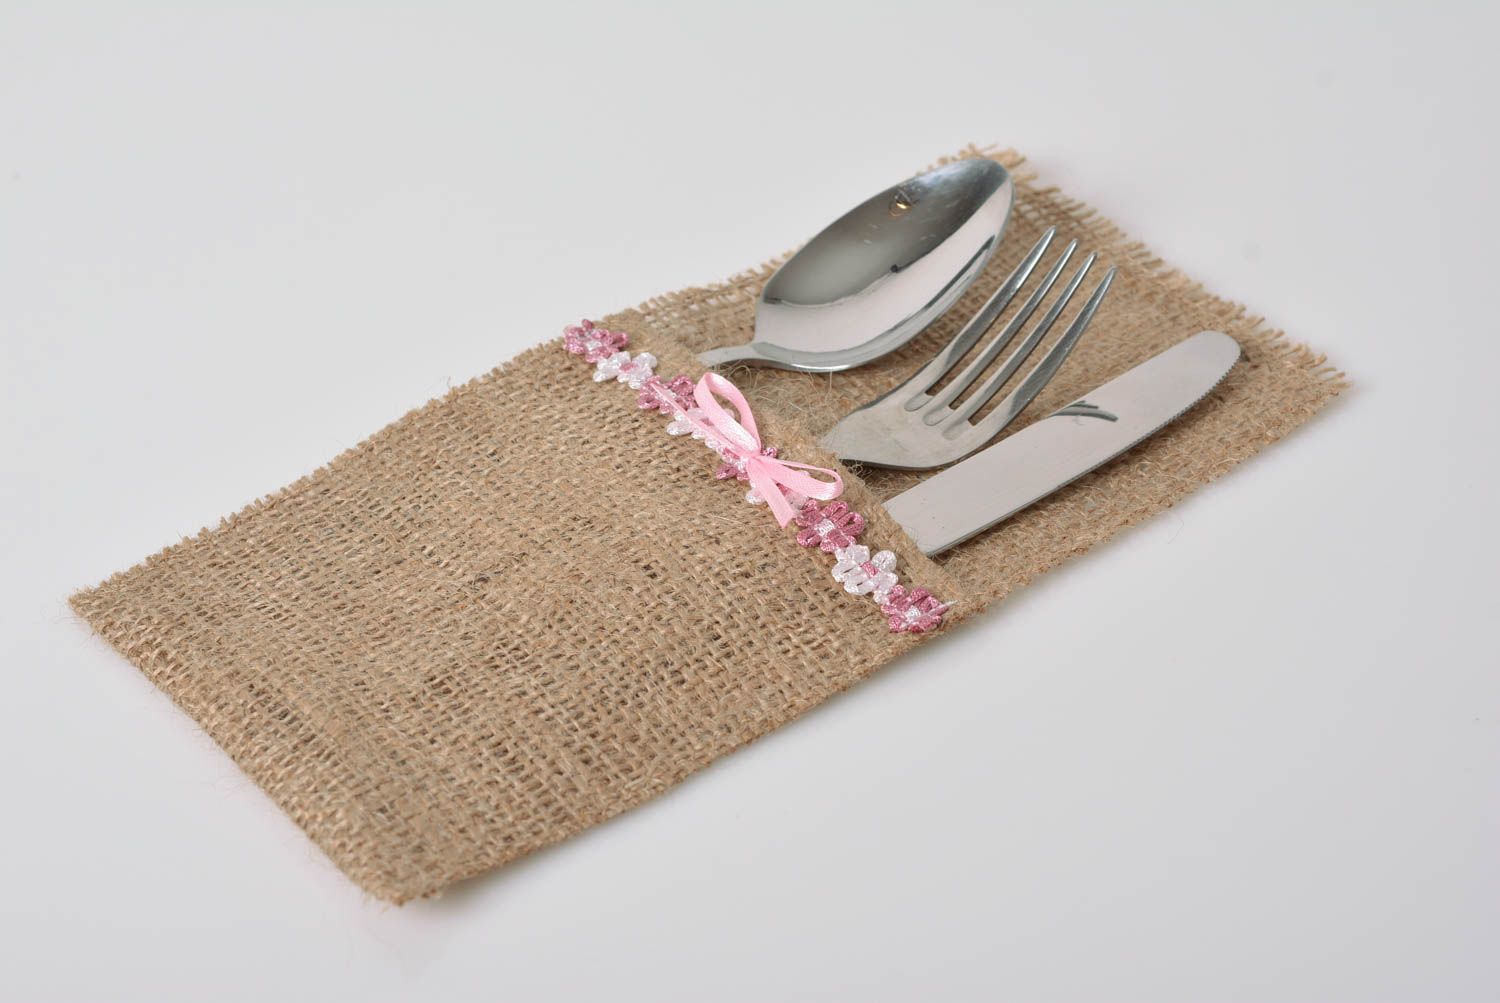 Case for cutlery made of burlap beautiful handmade eco clean kitchen decor photo 2